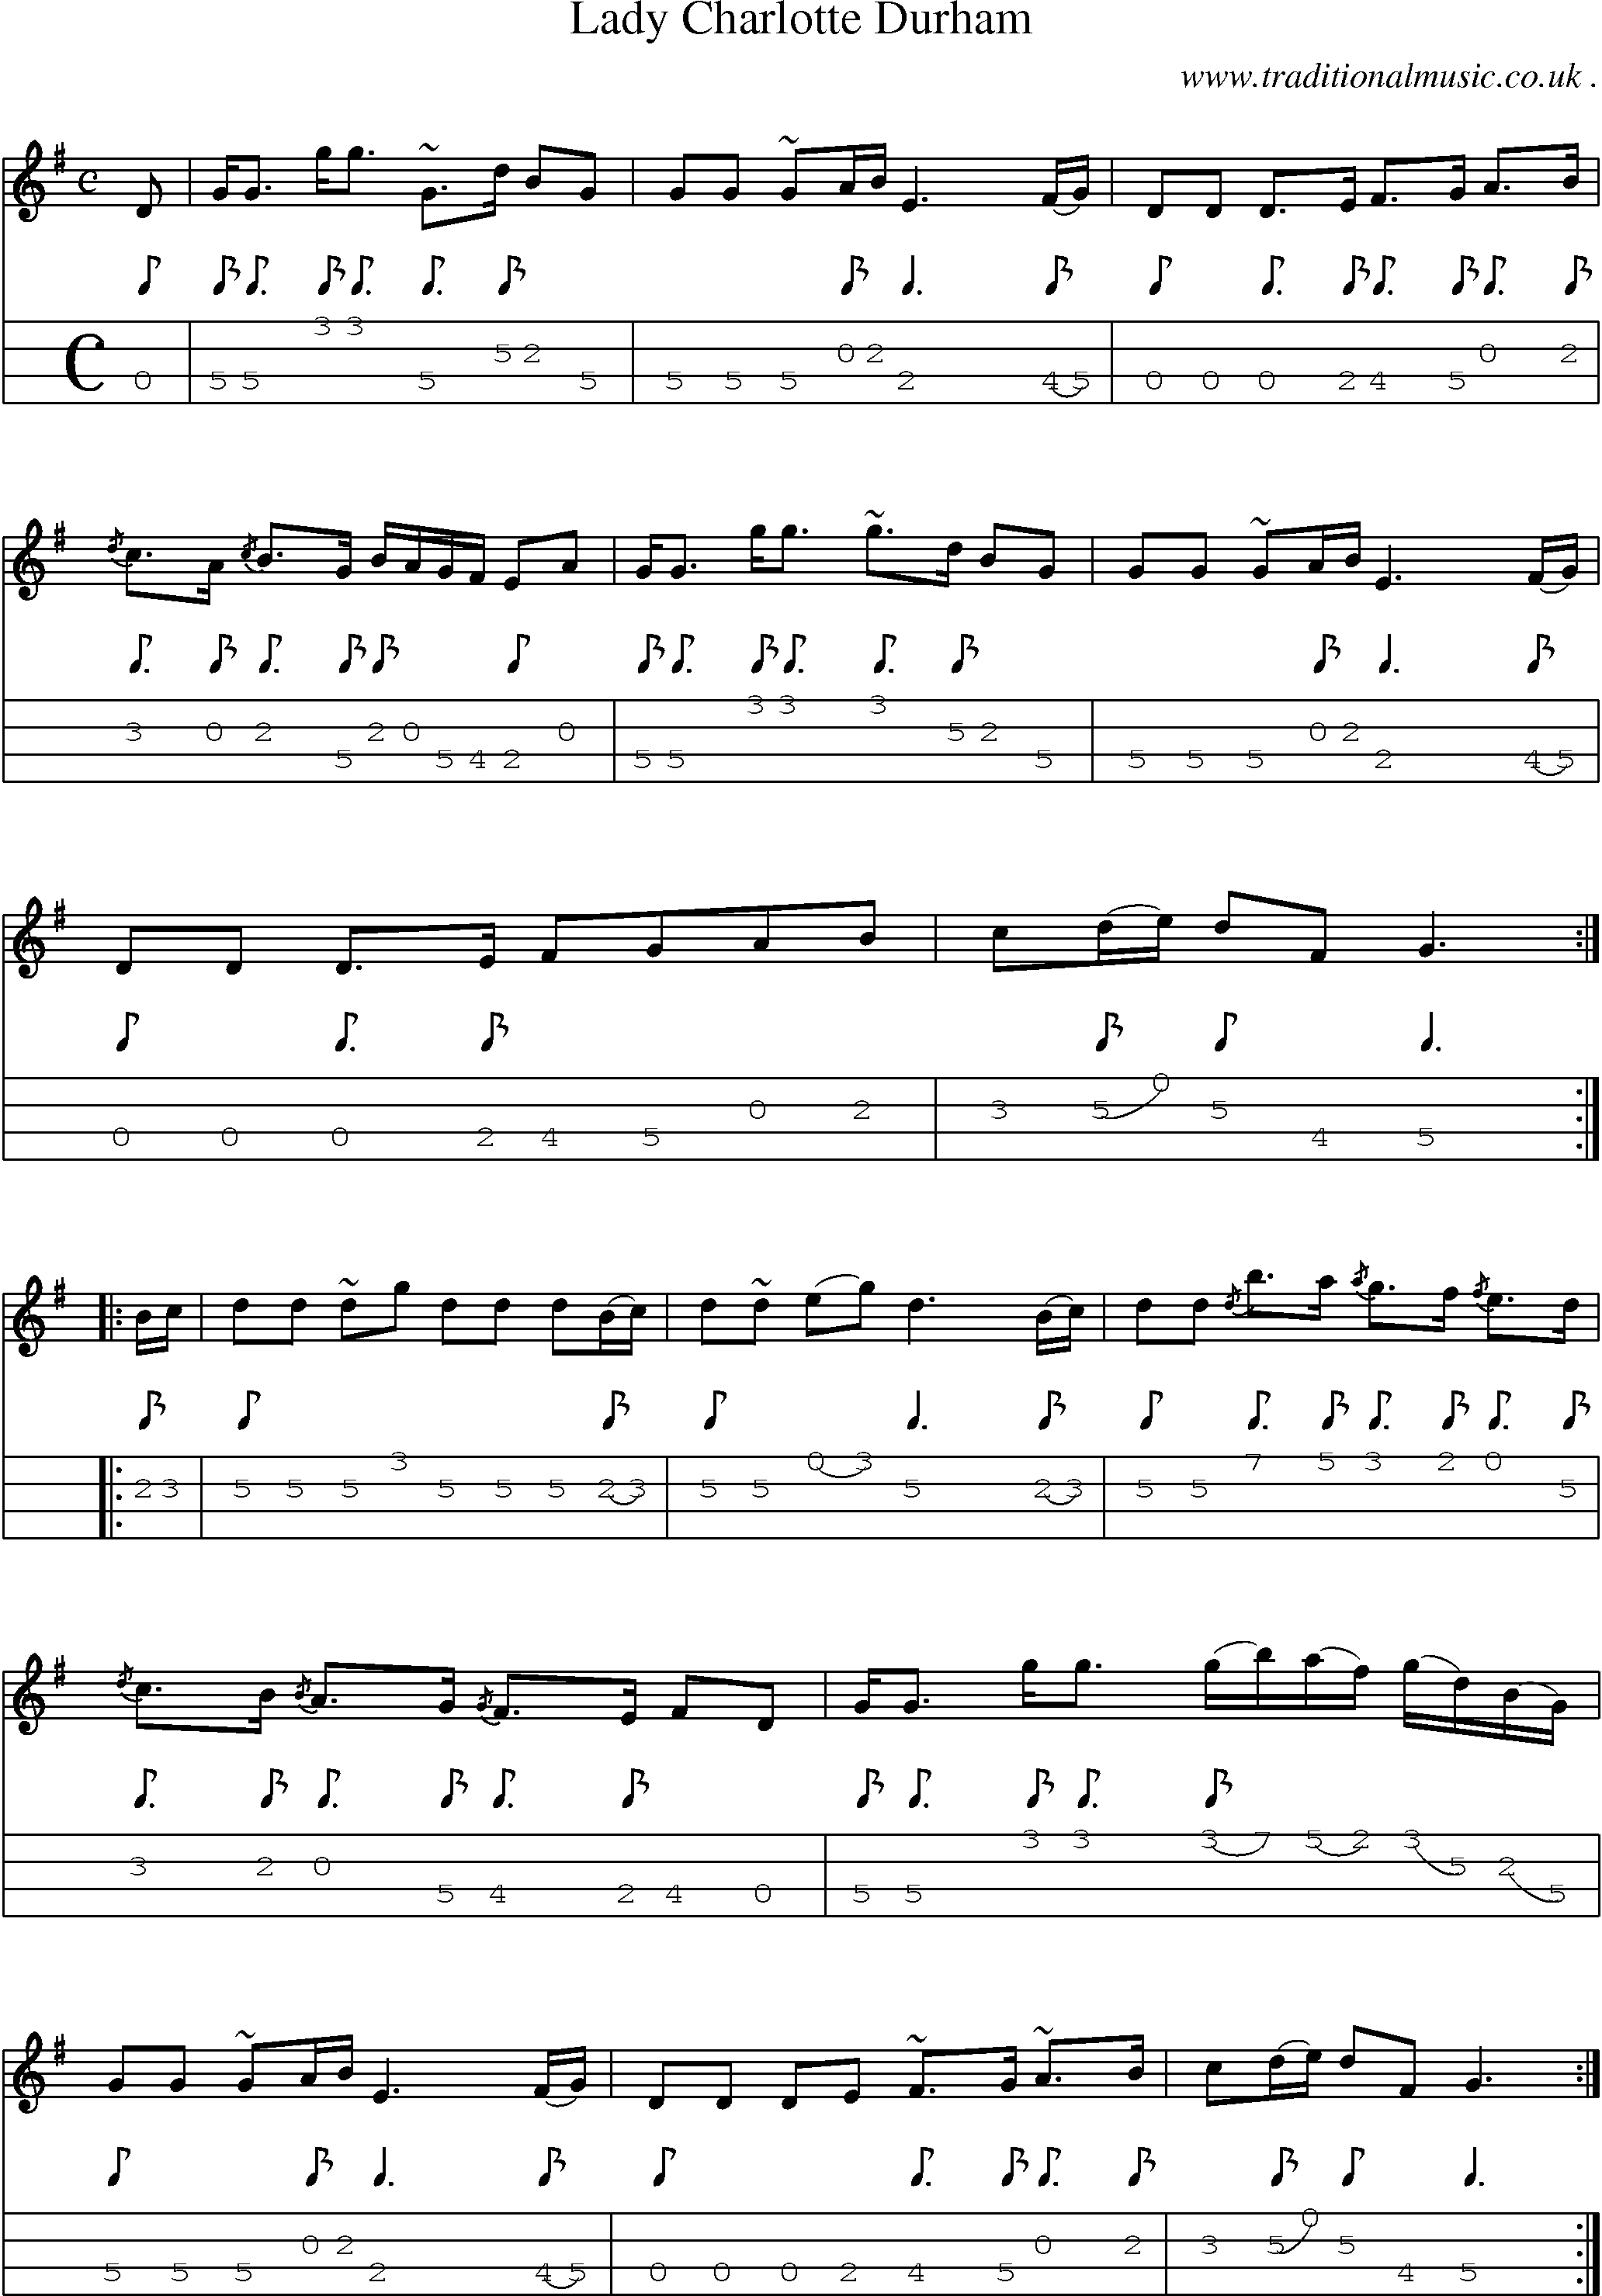 Sheet-music  score, Chords and Mandolin Tabs for Lady Charlotte Durham